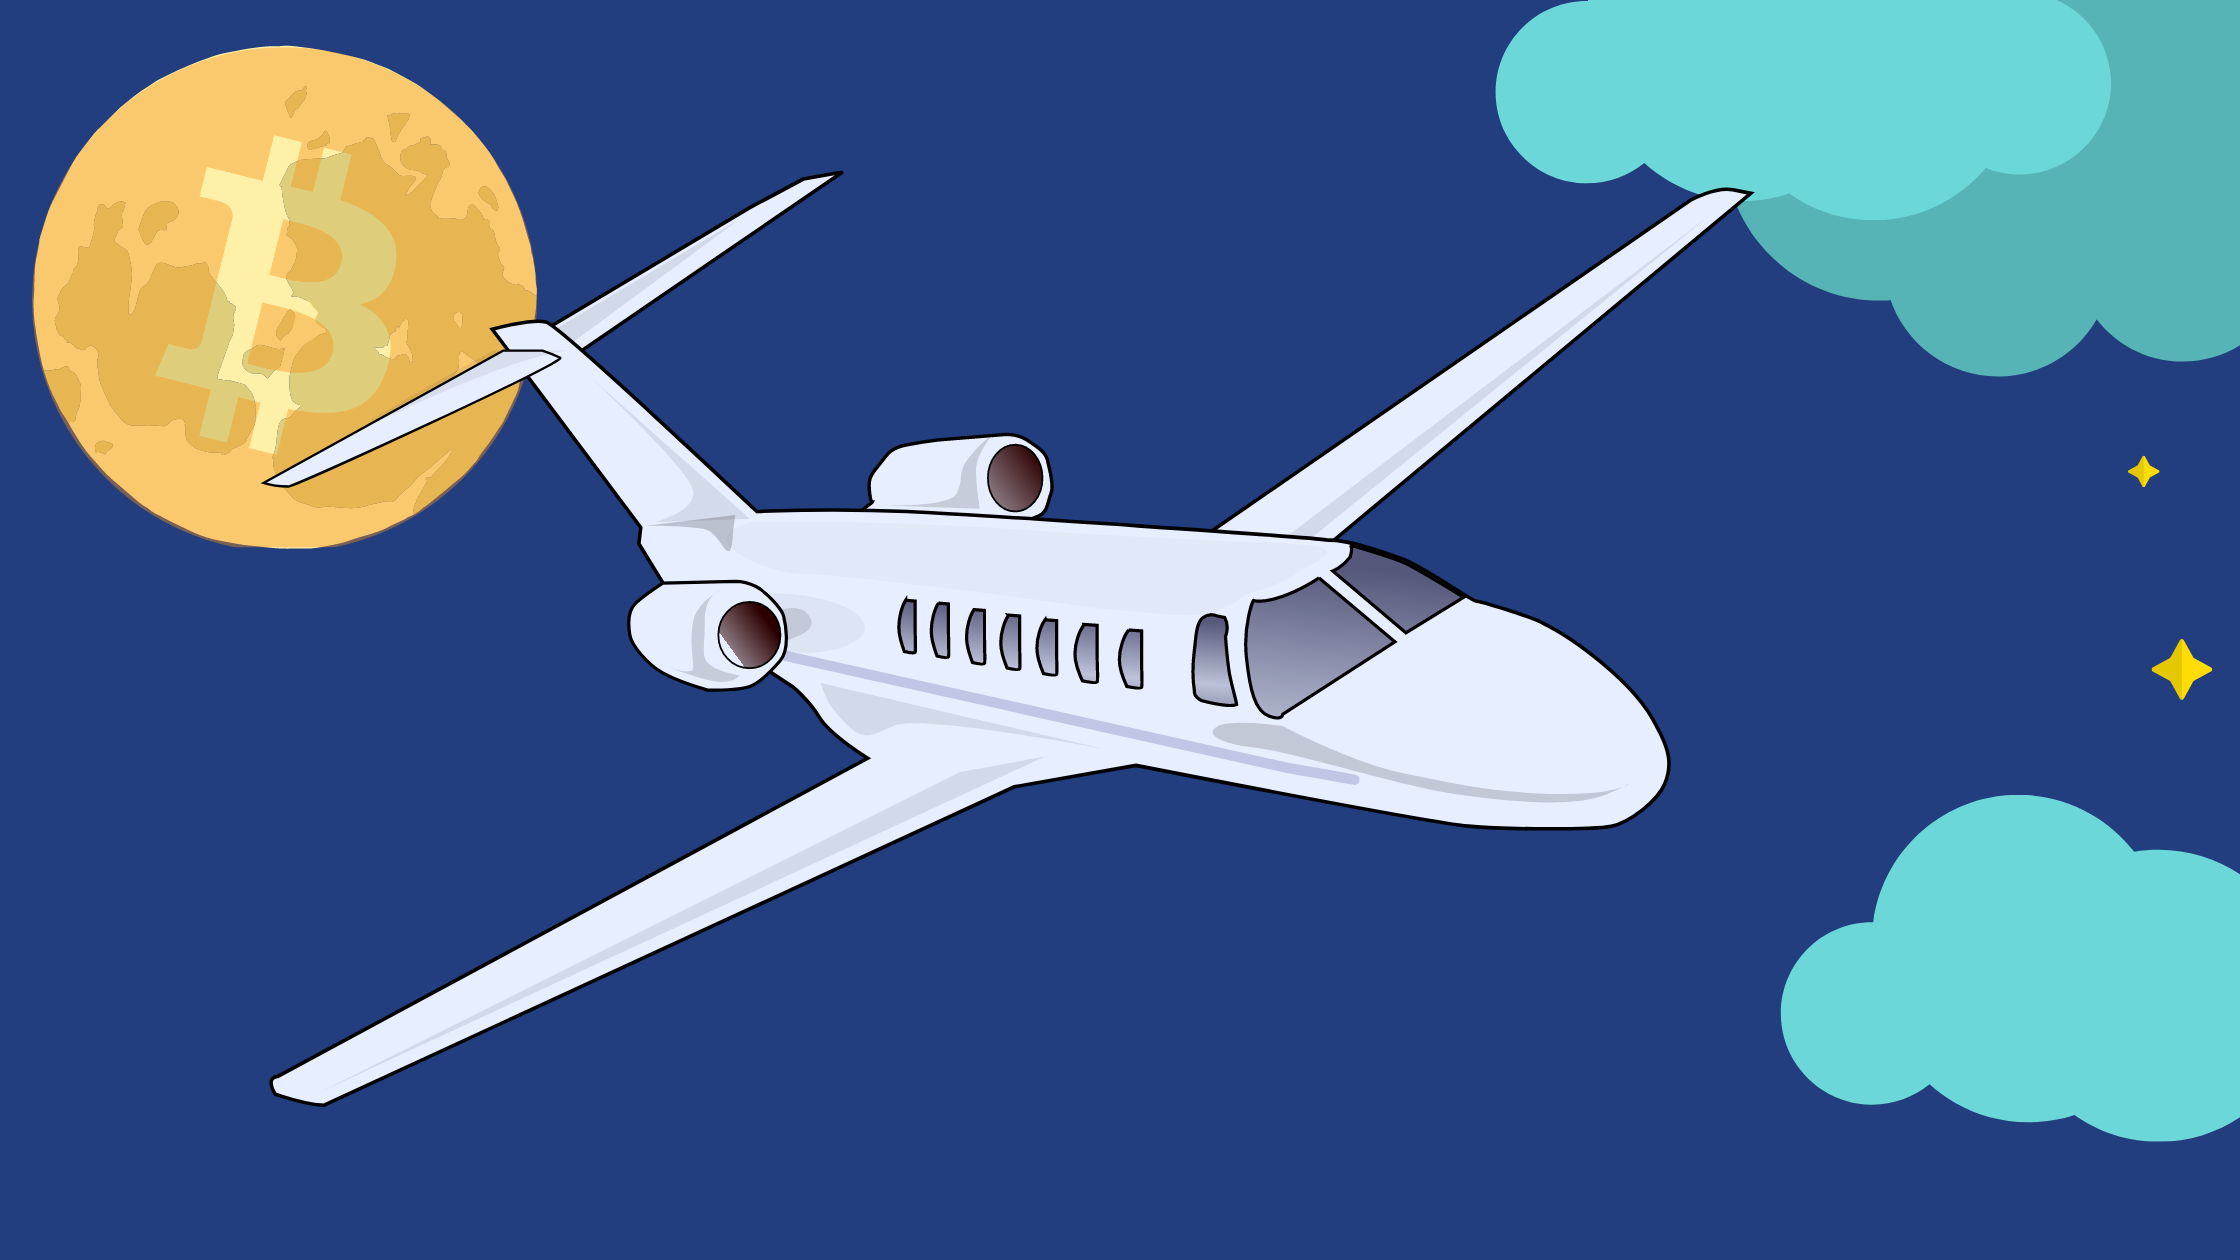 Booking a Private Jet with Bitcoin and Cryptocurrency | BitPay